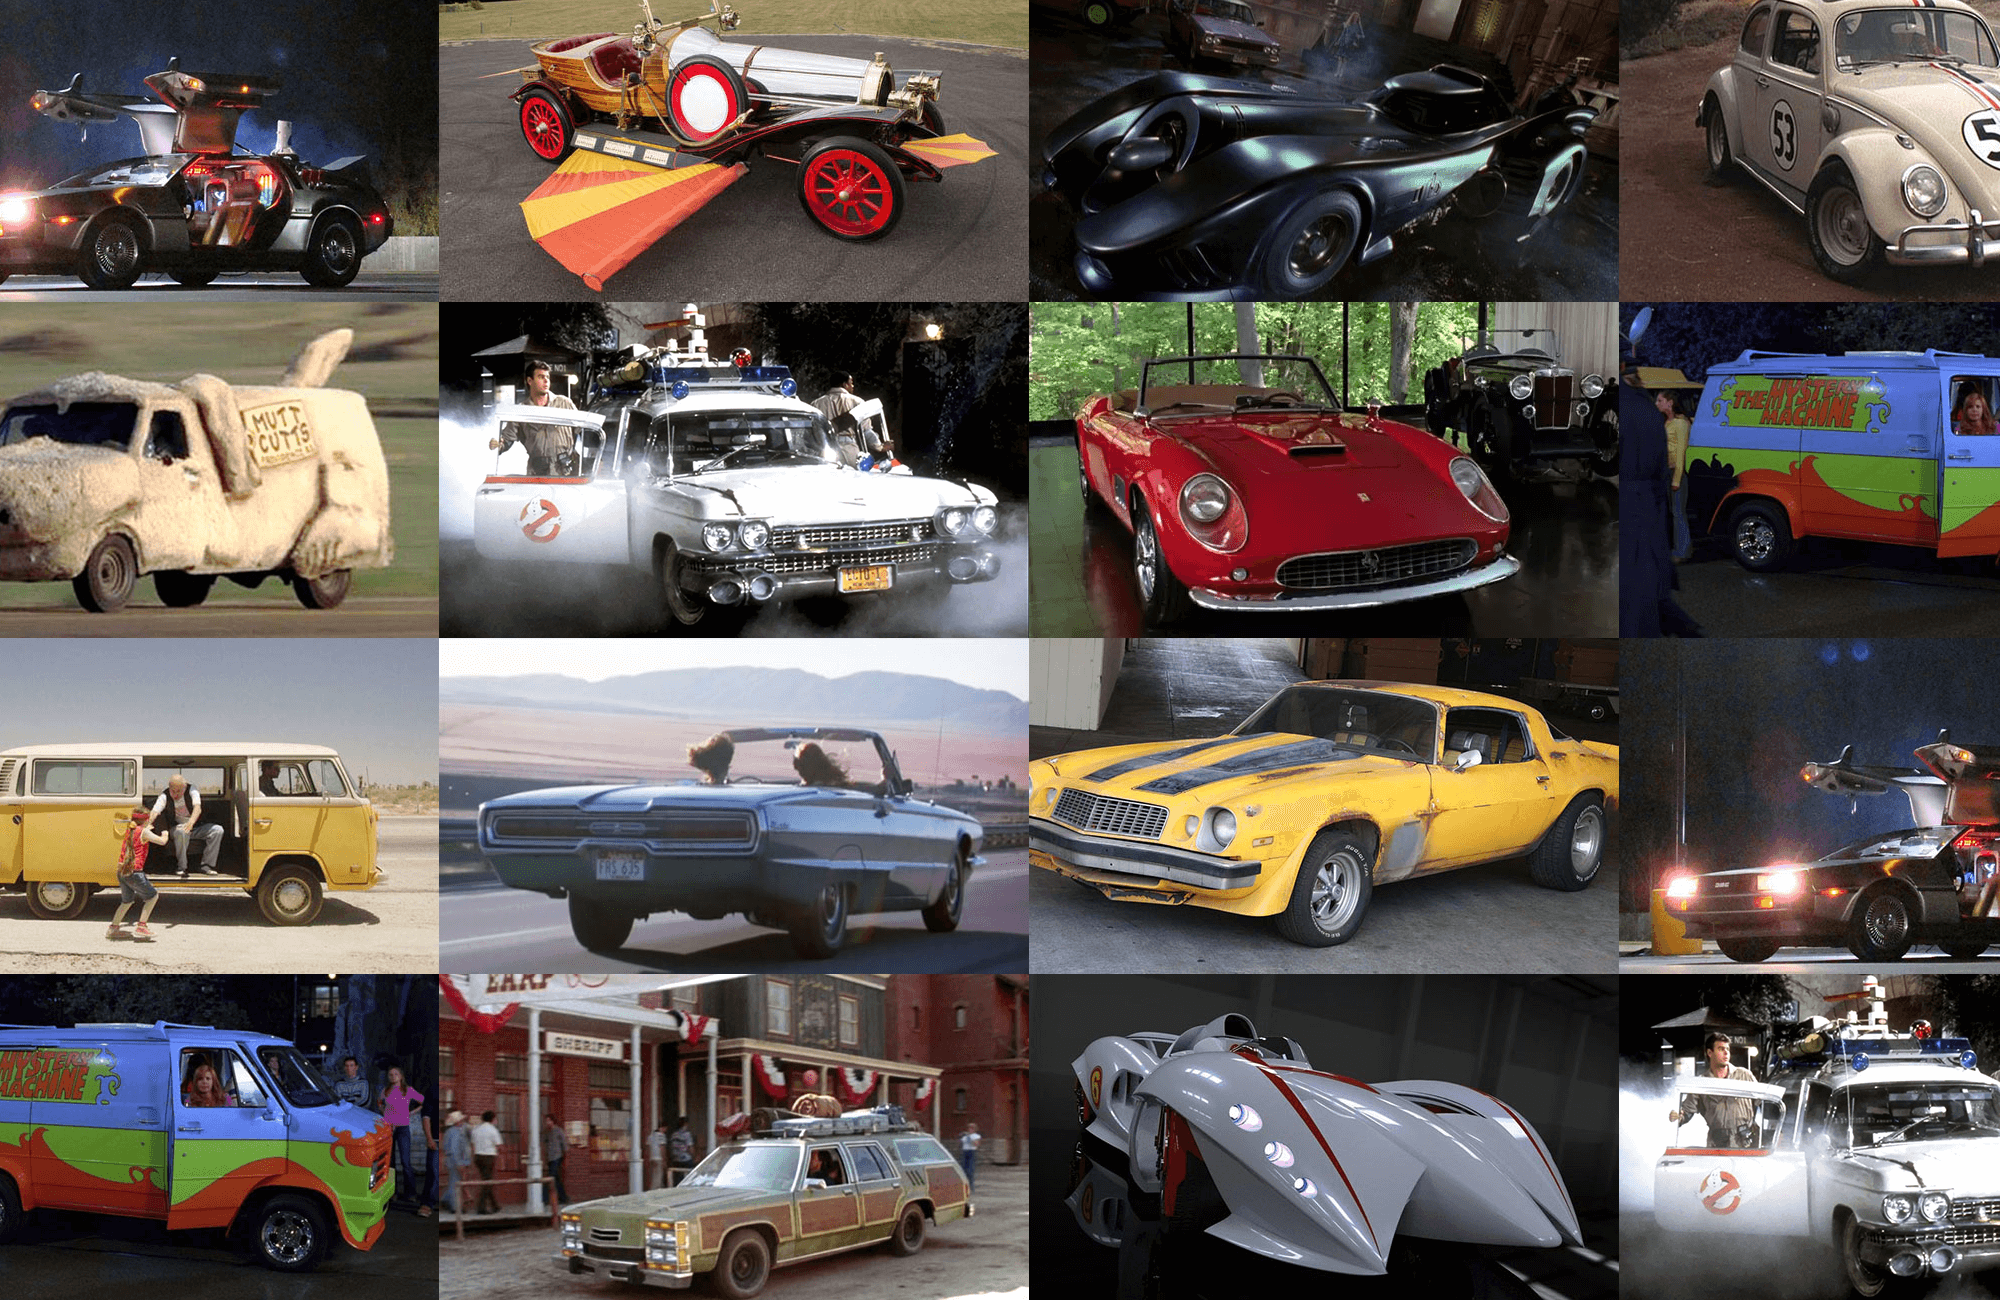 Quiz: Can You Name These 13 Movies Based on Their Memorable Car?